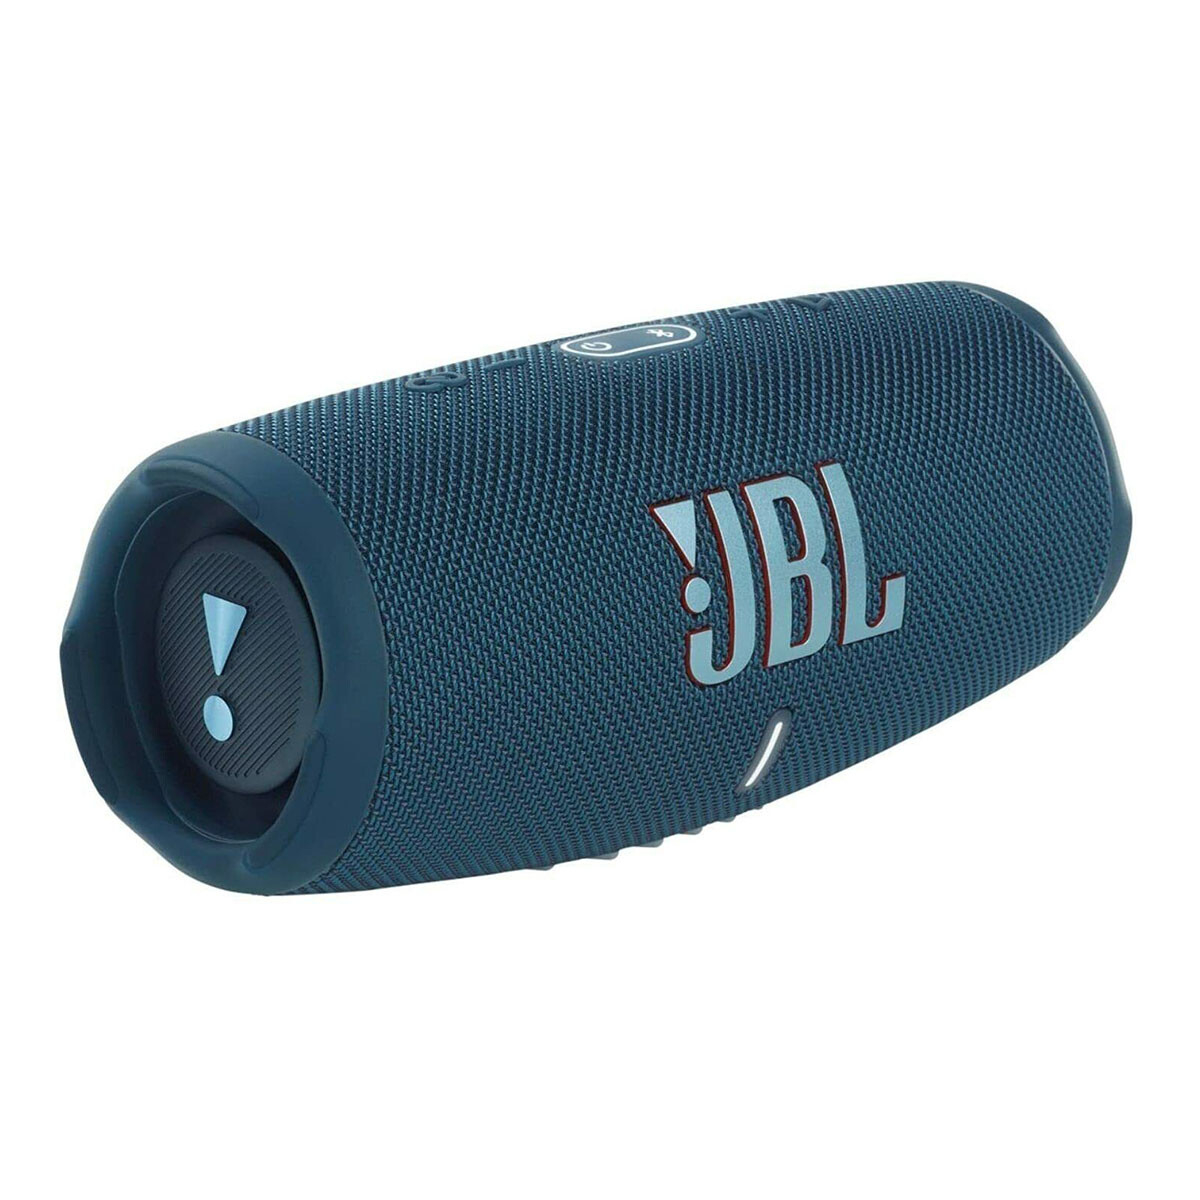 REPRODUCTOR BT JBL CHARGE 5 AZUL 